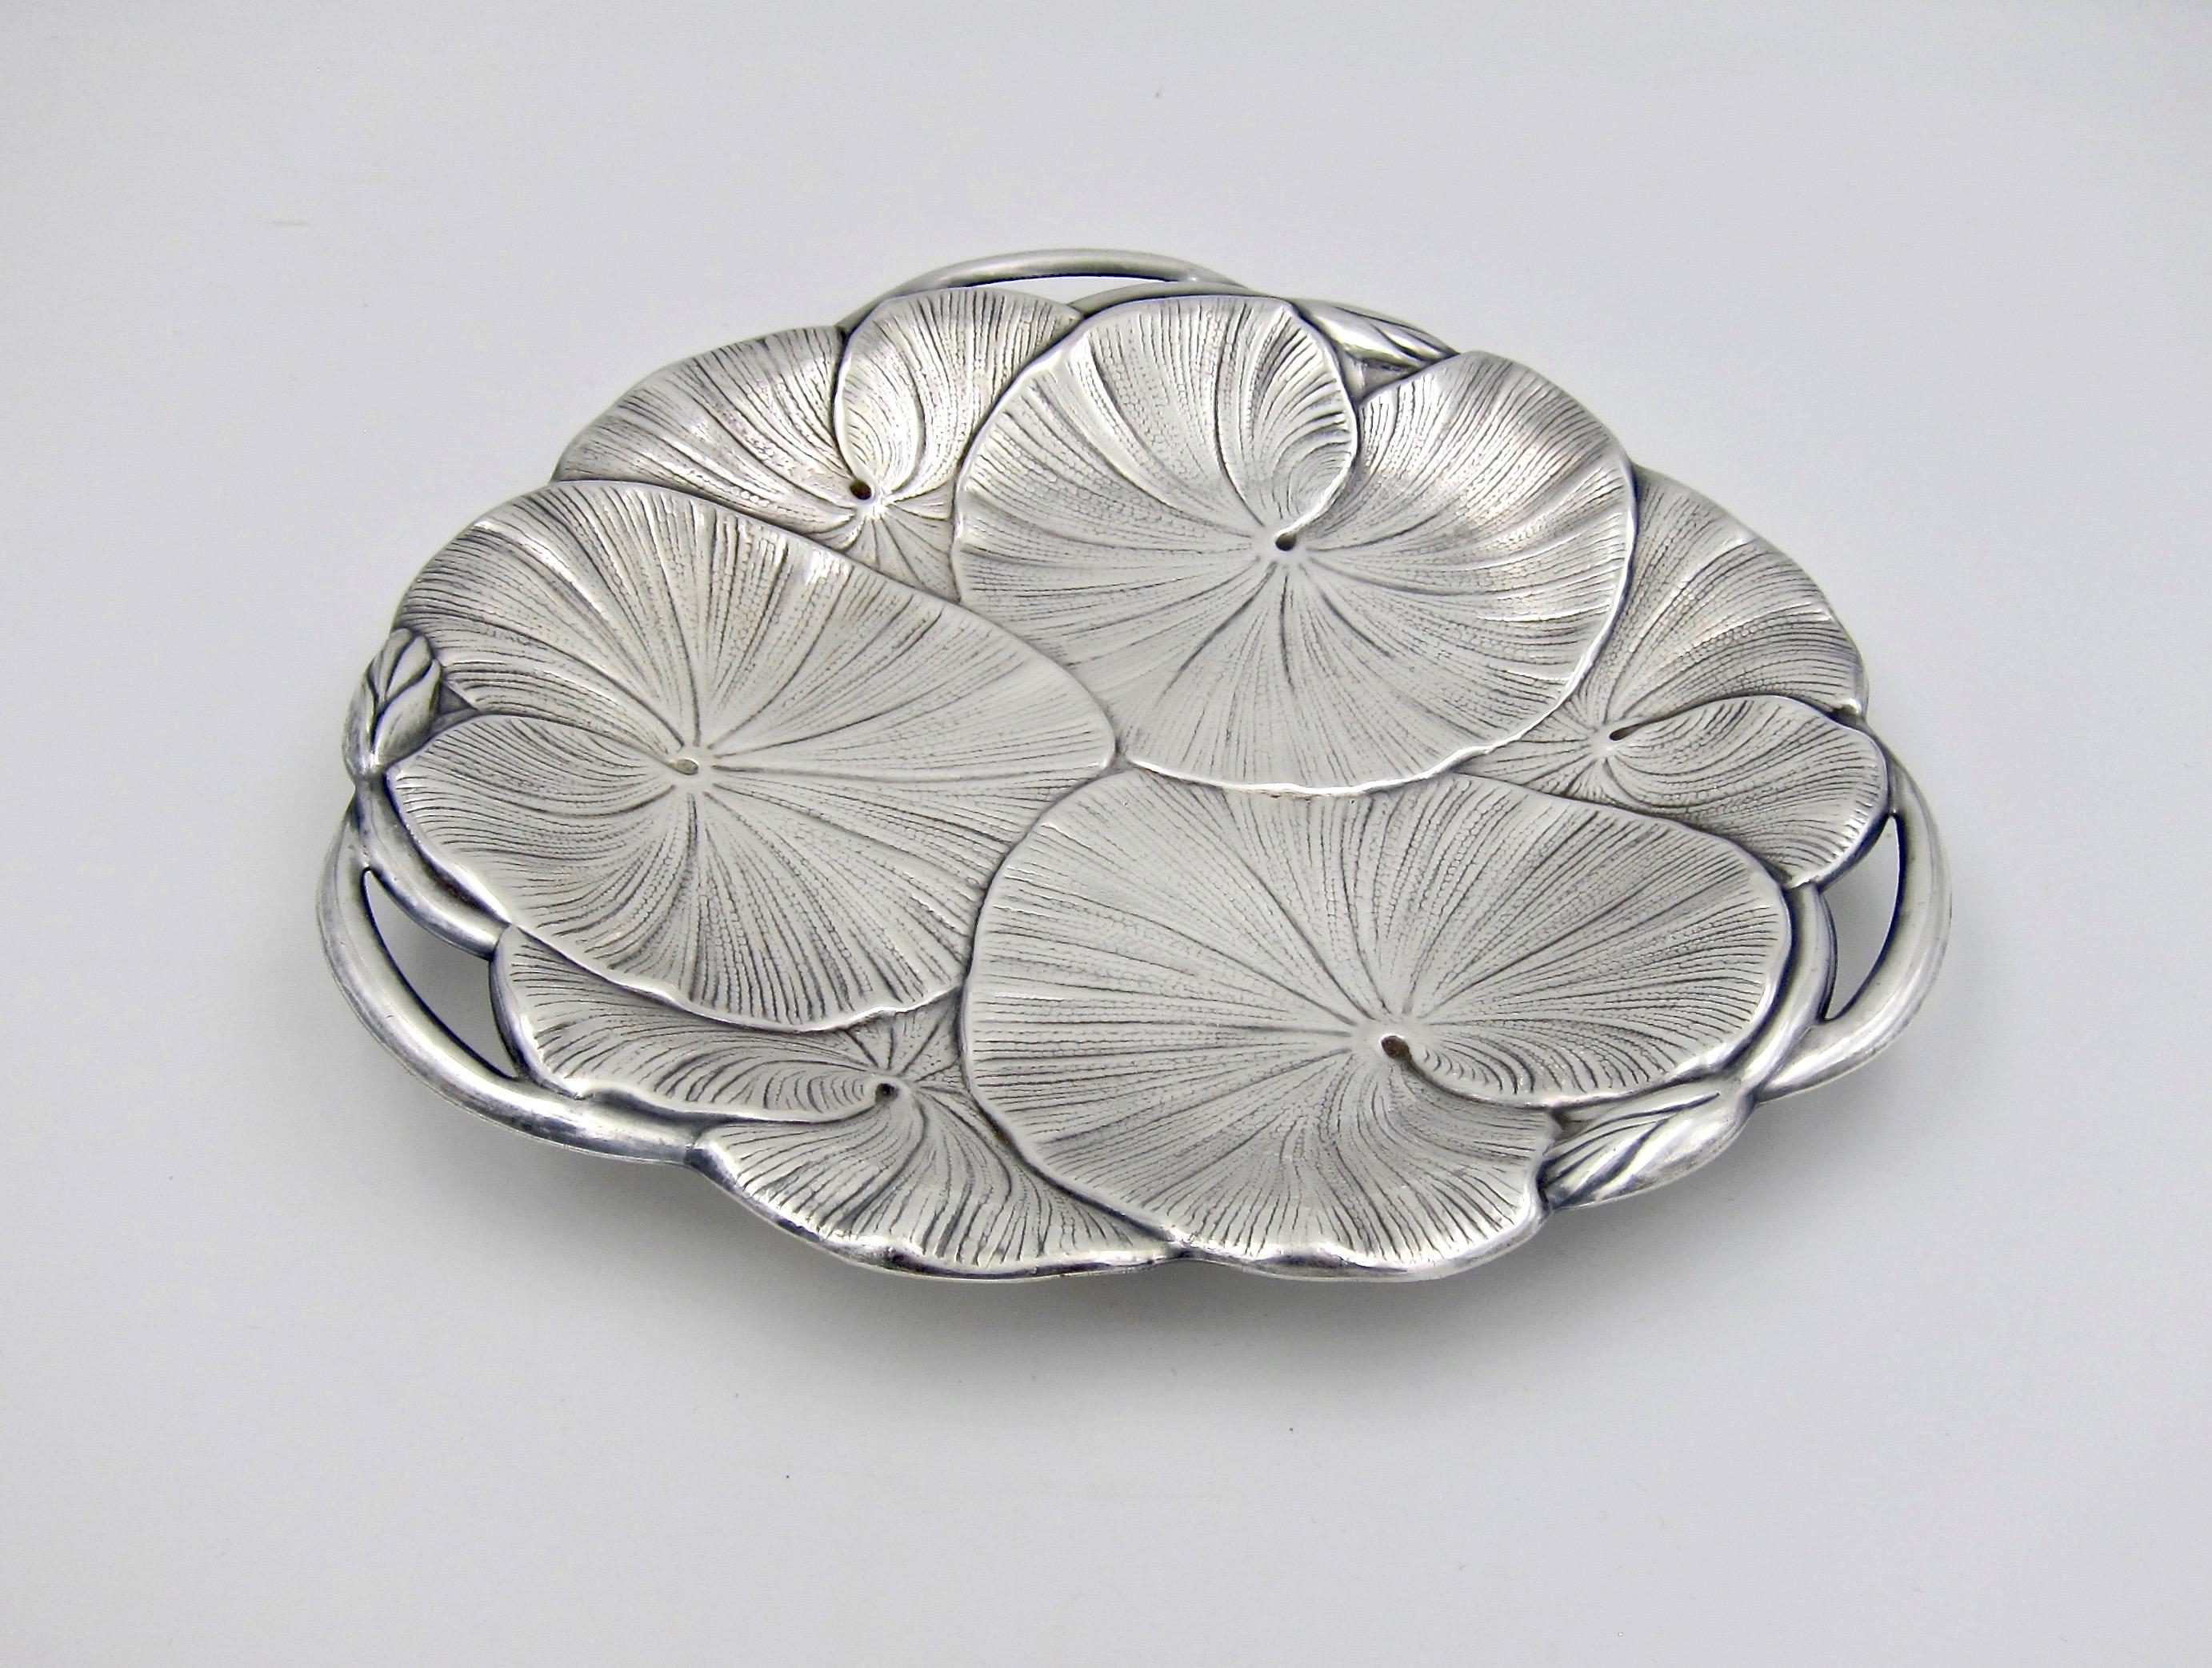 An American Art Nouveau tray from Wilcox International Silver Company of Meriden, Connecticut, dating circa 1930s. The vintage stamped and silver-plated design features overlapping lily pad leaves with three buds and three open handles encircling